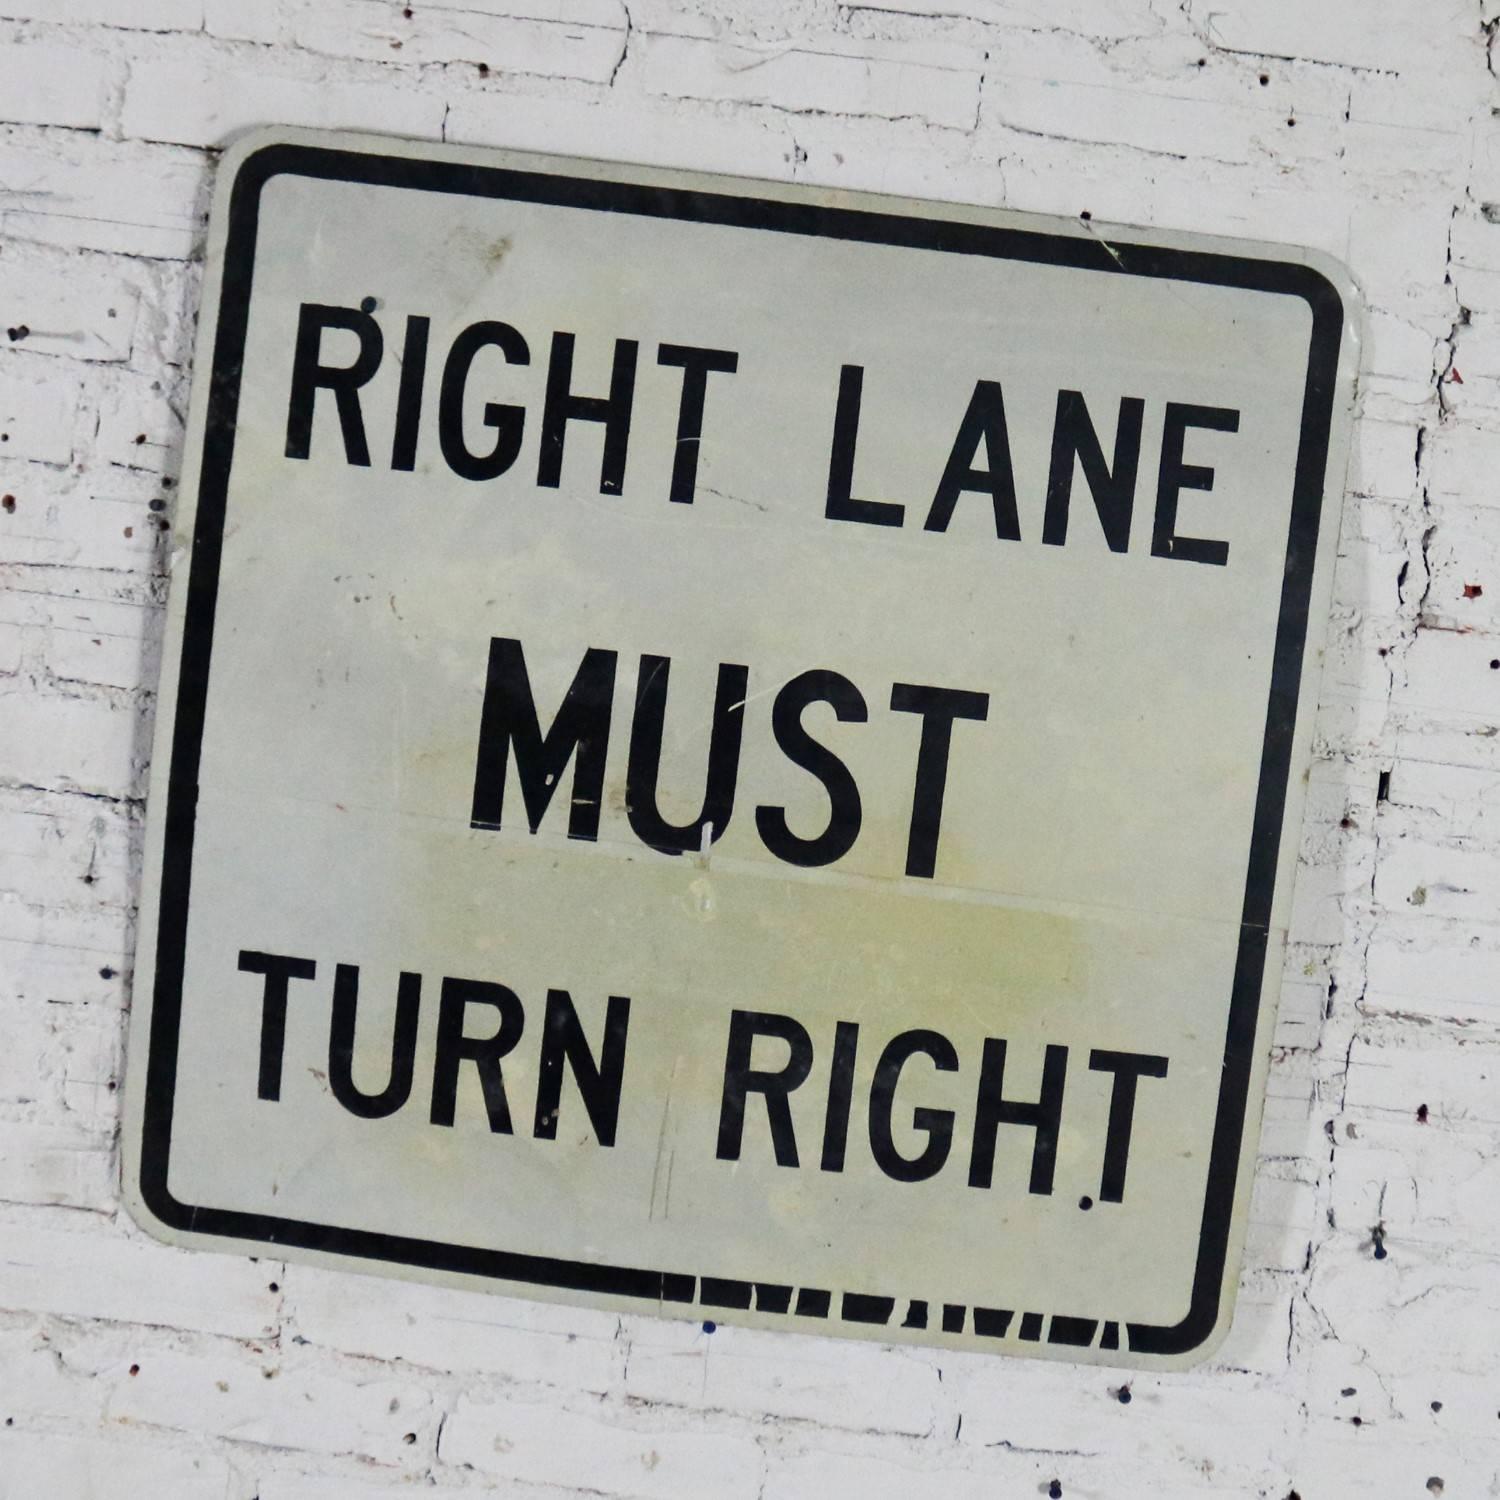 Awesome vintage steel Right Lane Must Turn Right traffic sign. This is a large sign and is in fabulous vintage condition with just the right amount of age and use patina. Please examine photos, circa 20th century.

Right lane must turn right, but